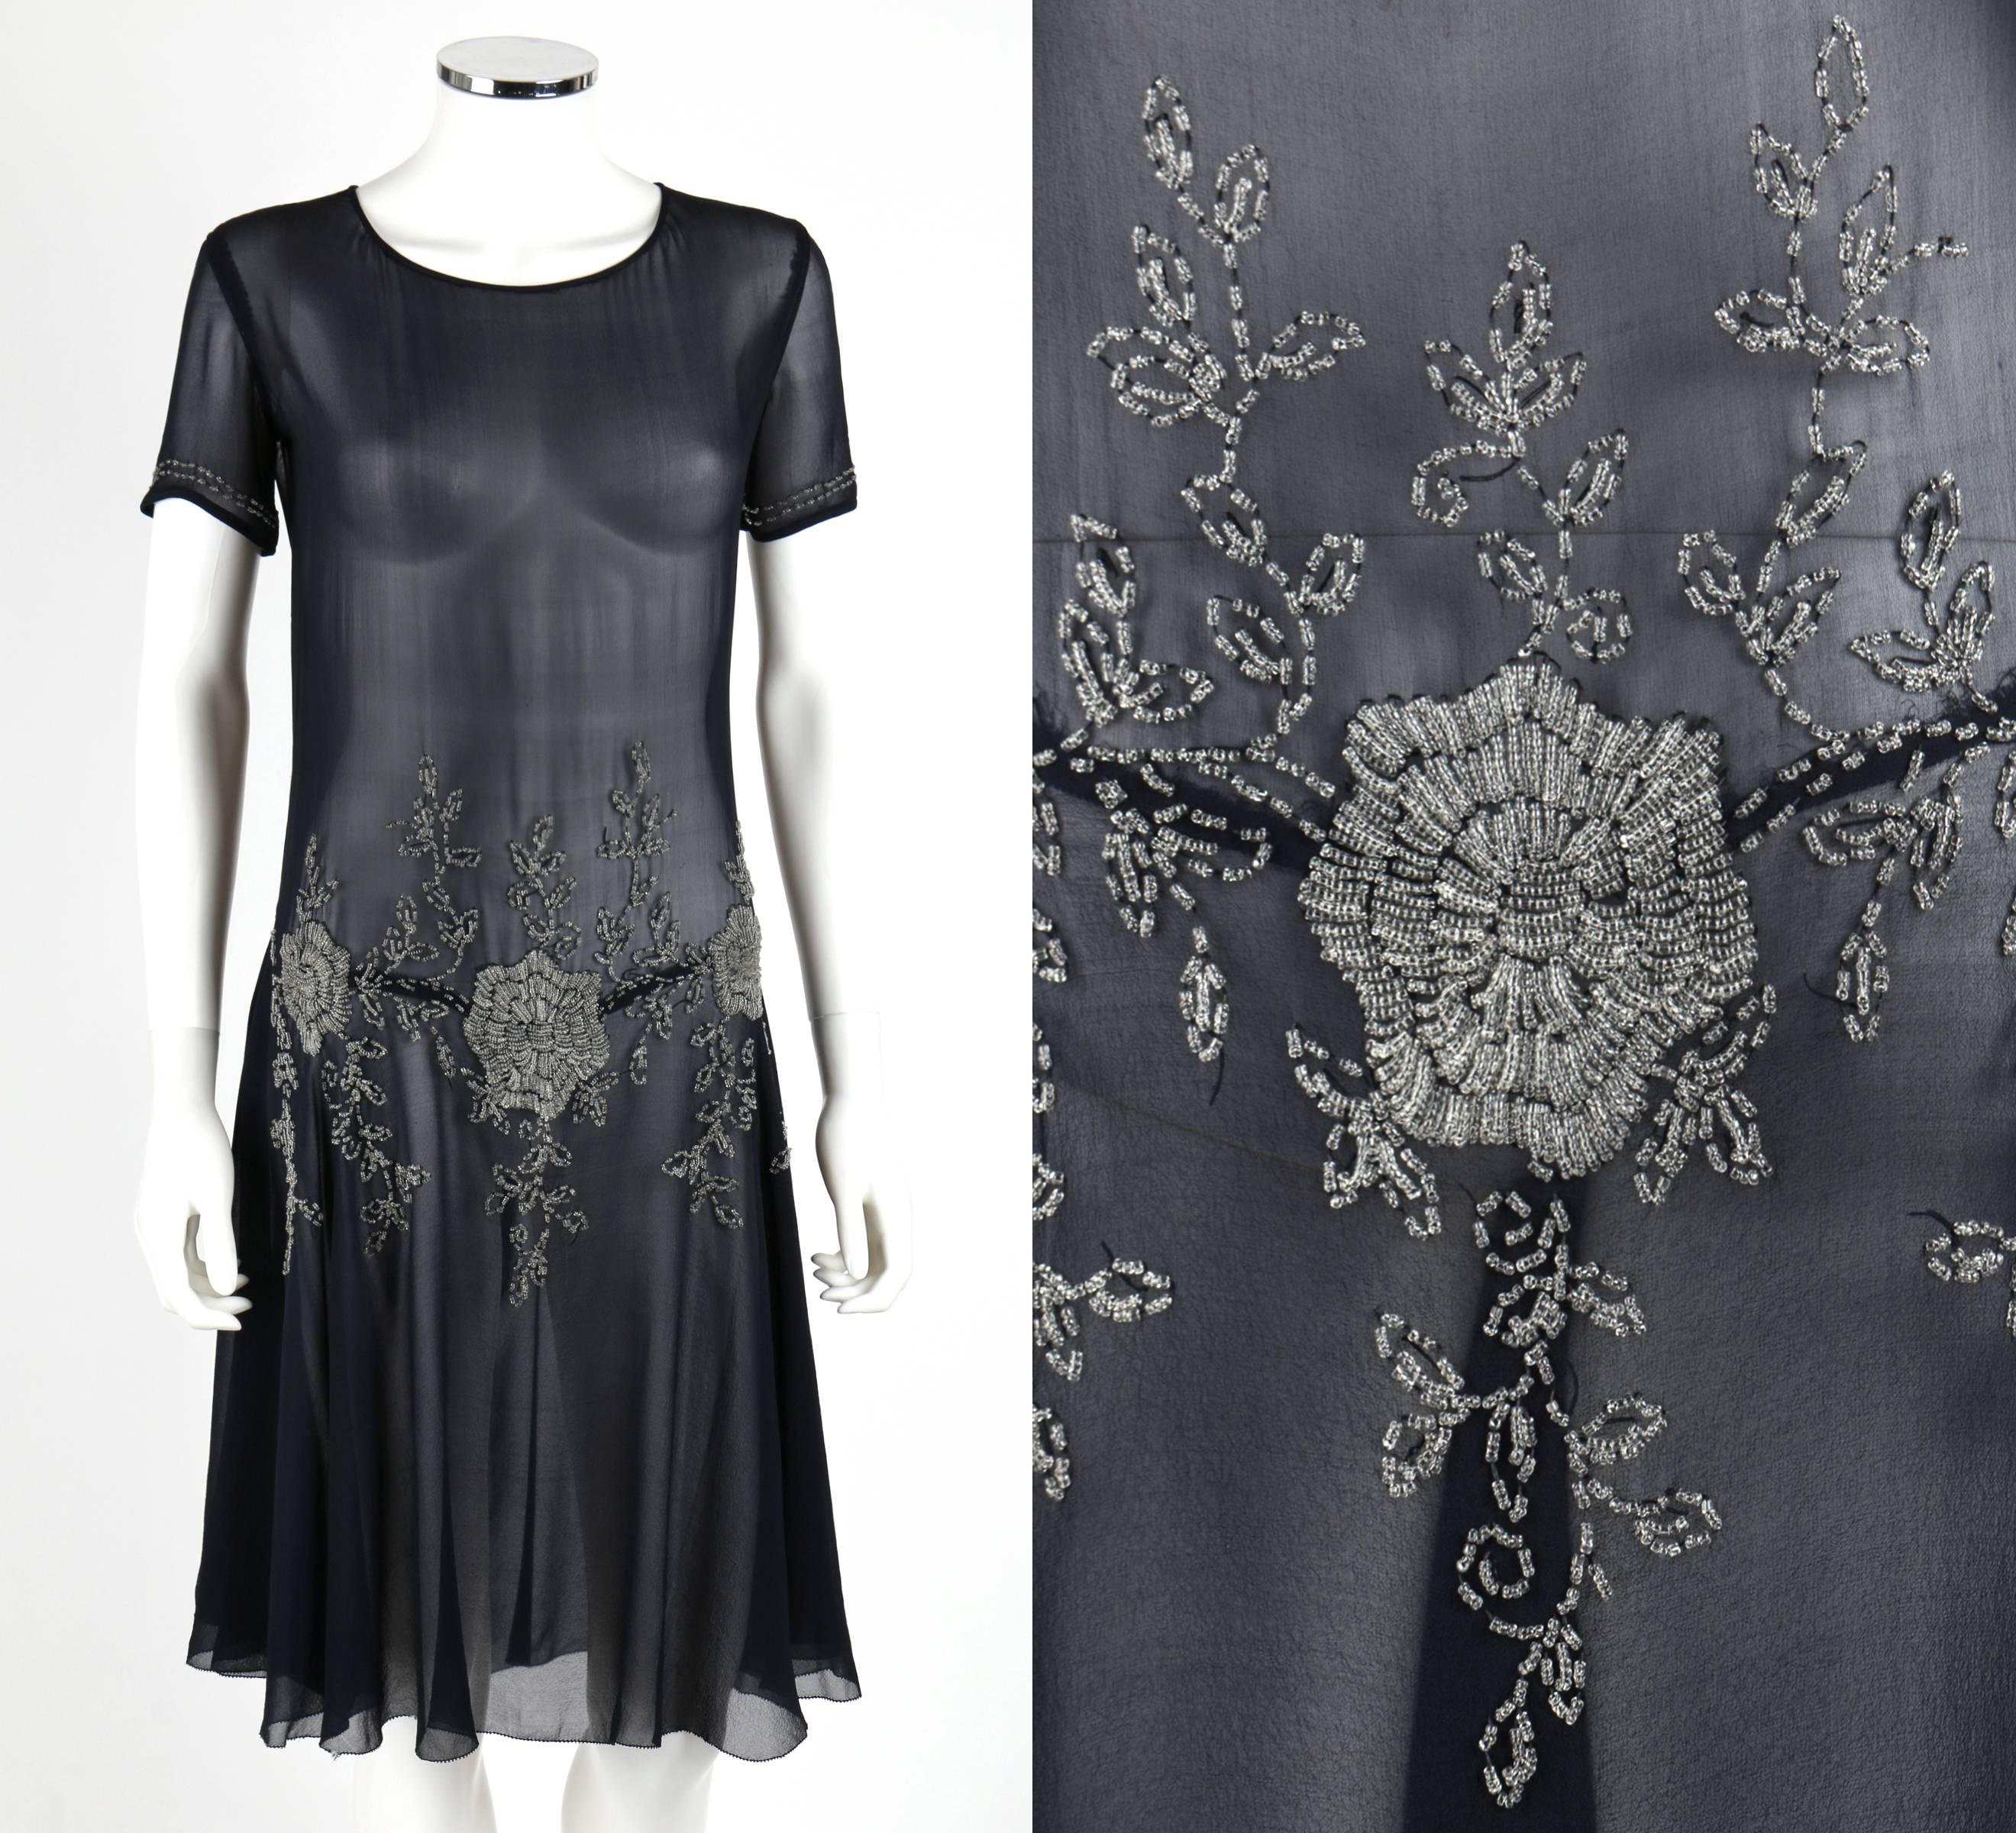 Vintage Couture (one of a kind) c.1920's navy chiffon evening dress. Short sleeves. Scoop neckline. Drop waist. Bias cut skirt. Clear glass bead floral embellishment at waistline and cuffs. Unmarked Fabric Content: Silk, glass beads. Measurements: